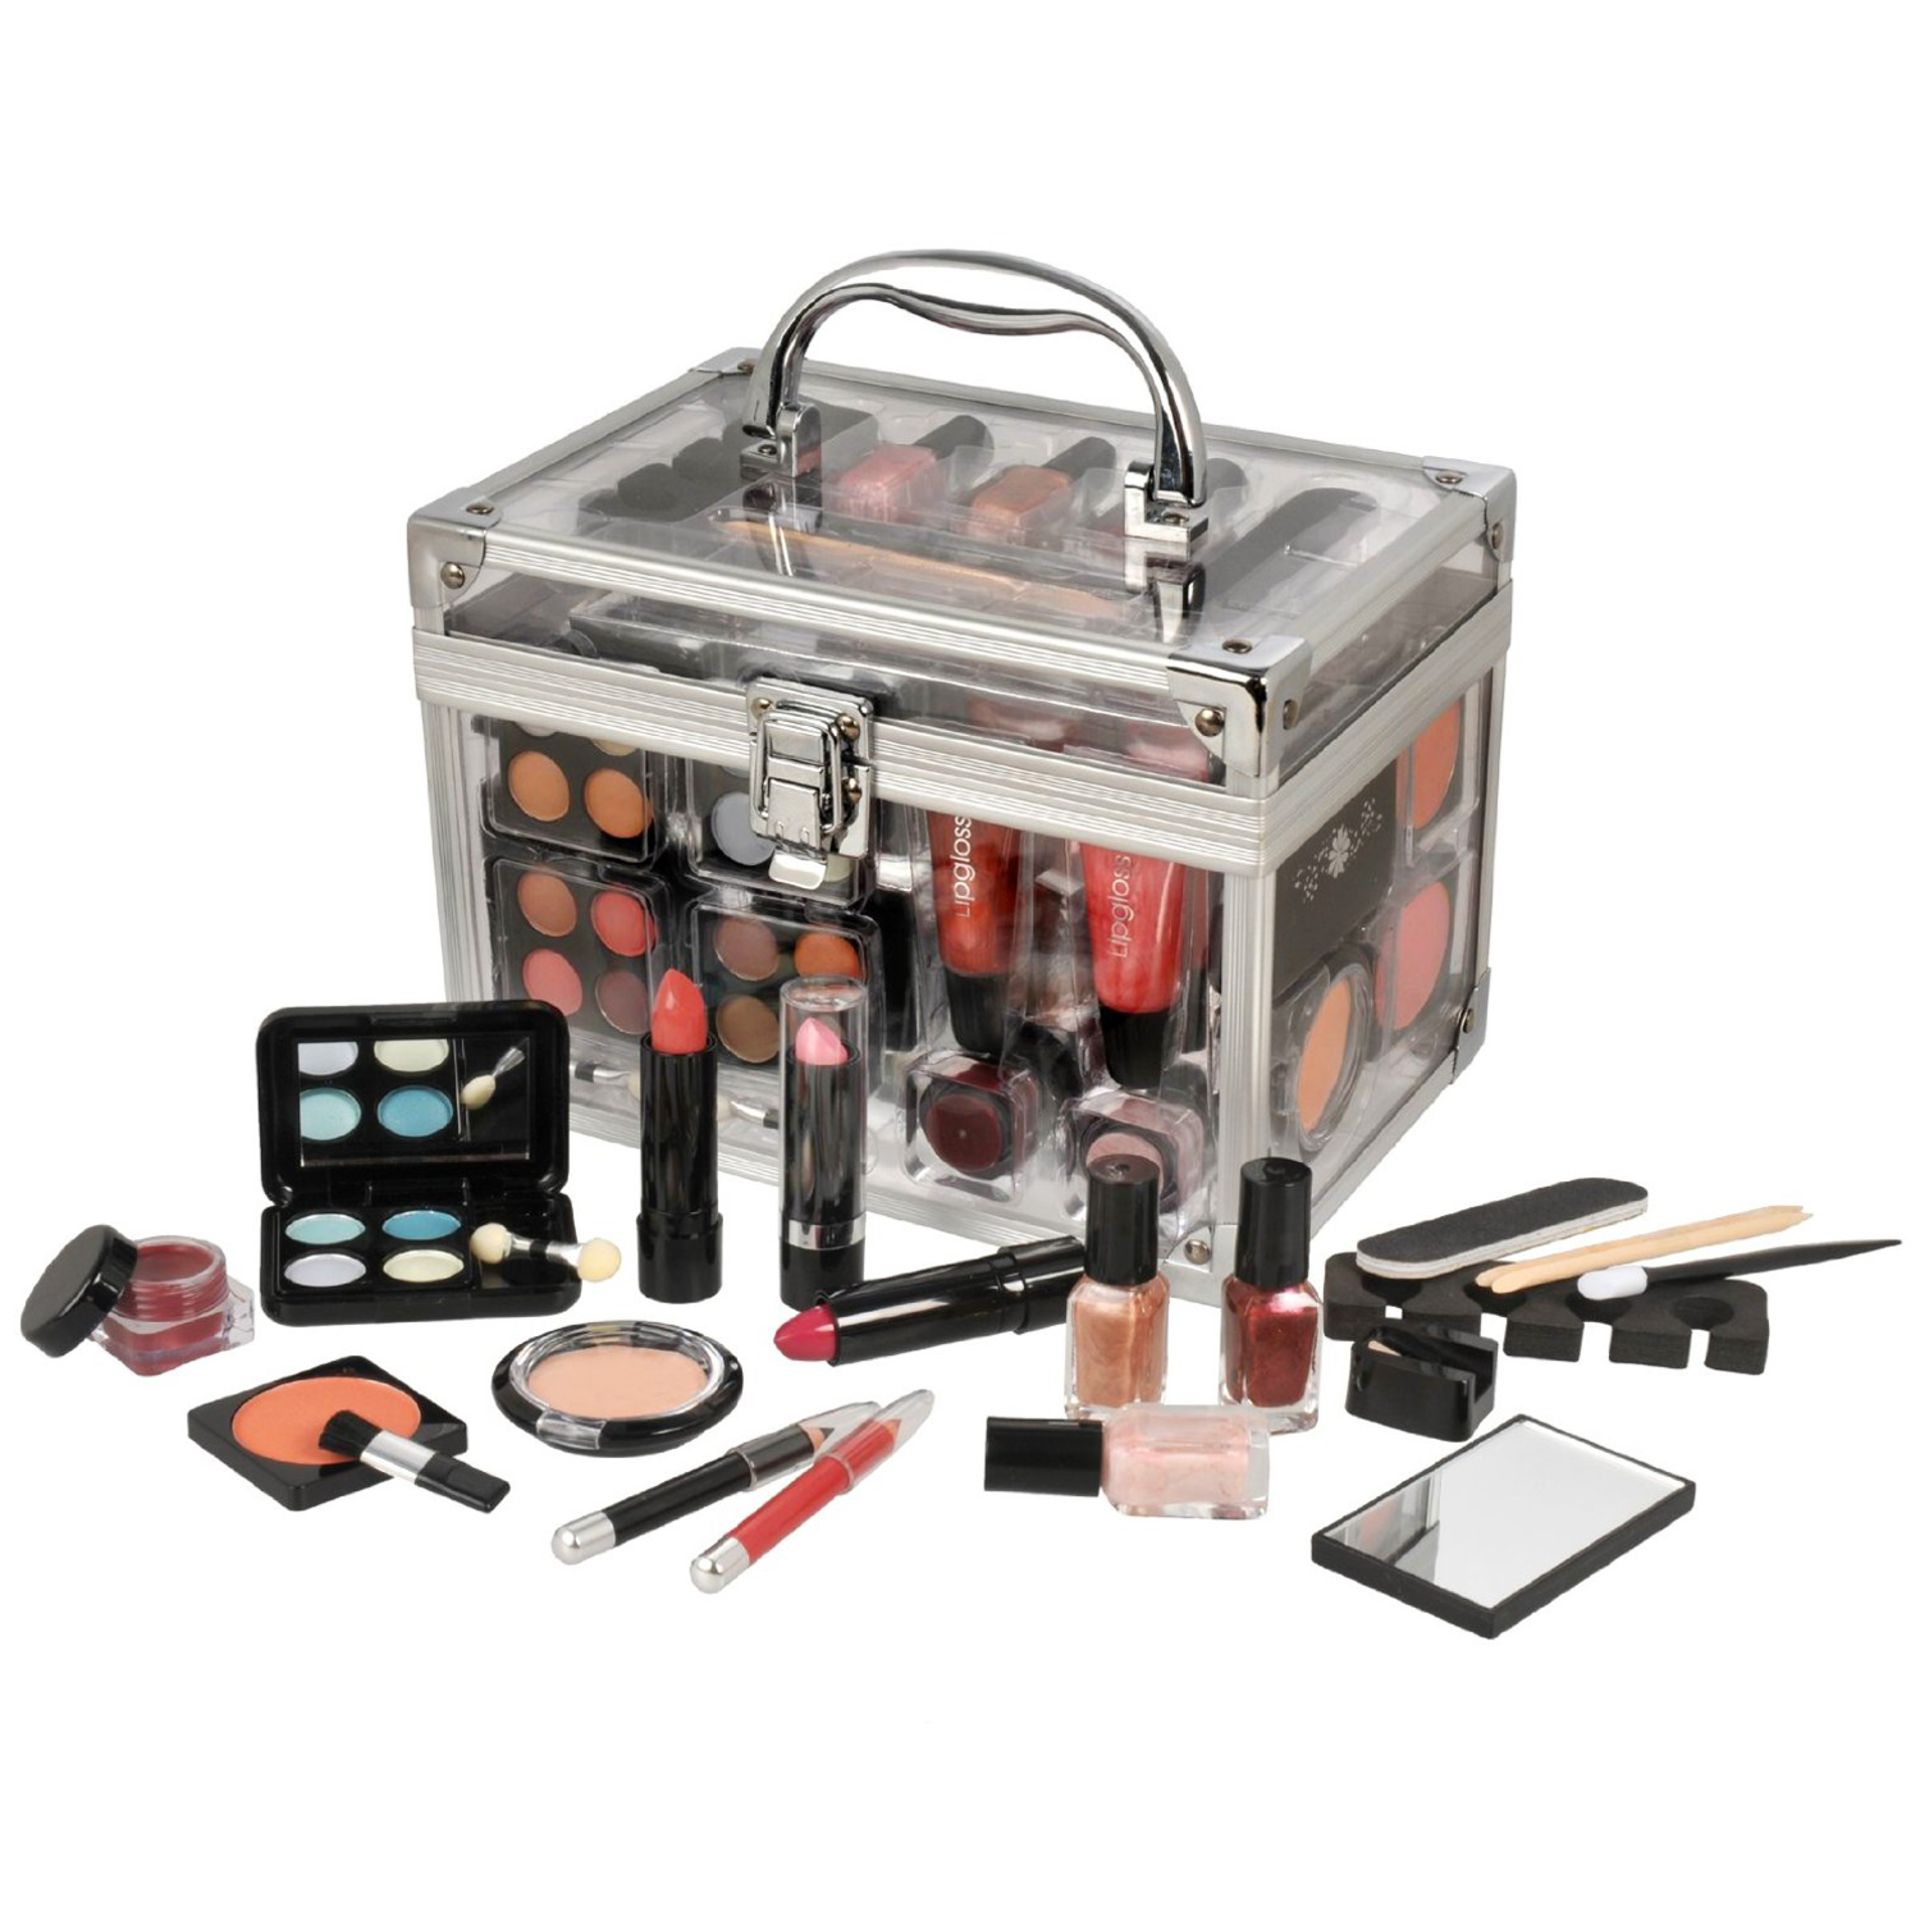 V Brand New Ladies 42 Piece Cosmetic Set In Aluminium/Clear Travel Case RRP £29.95 X 2 YOUR BID